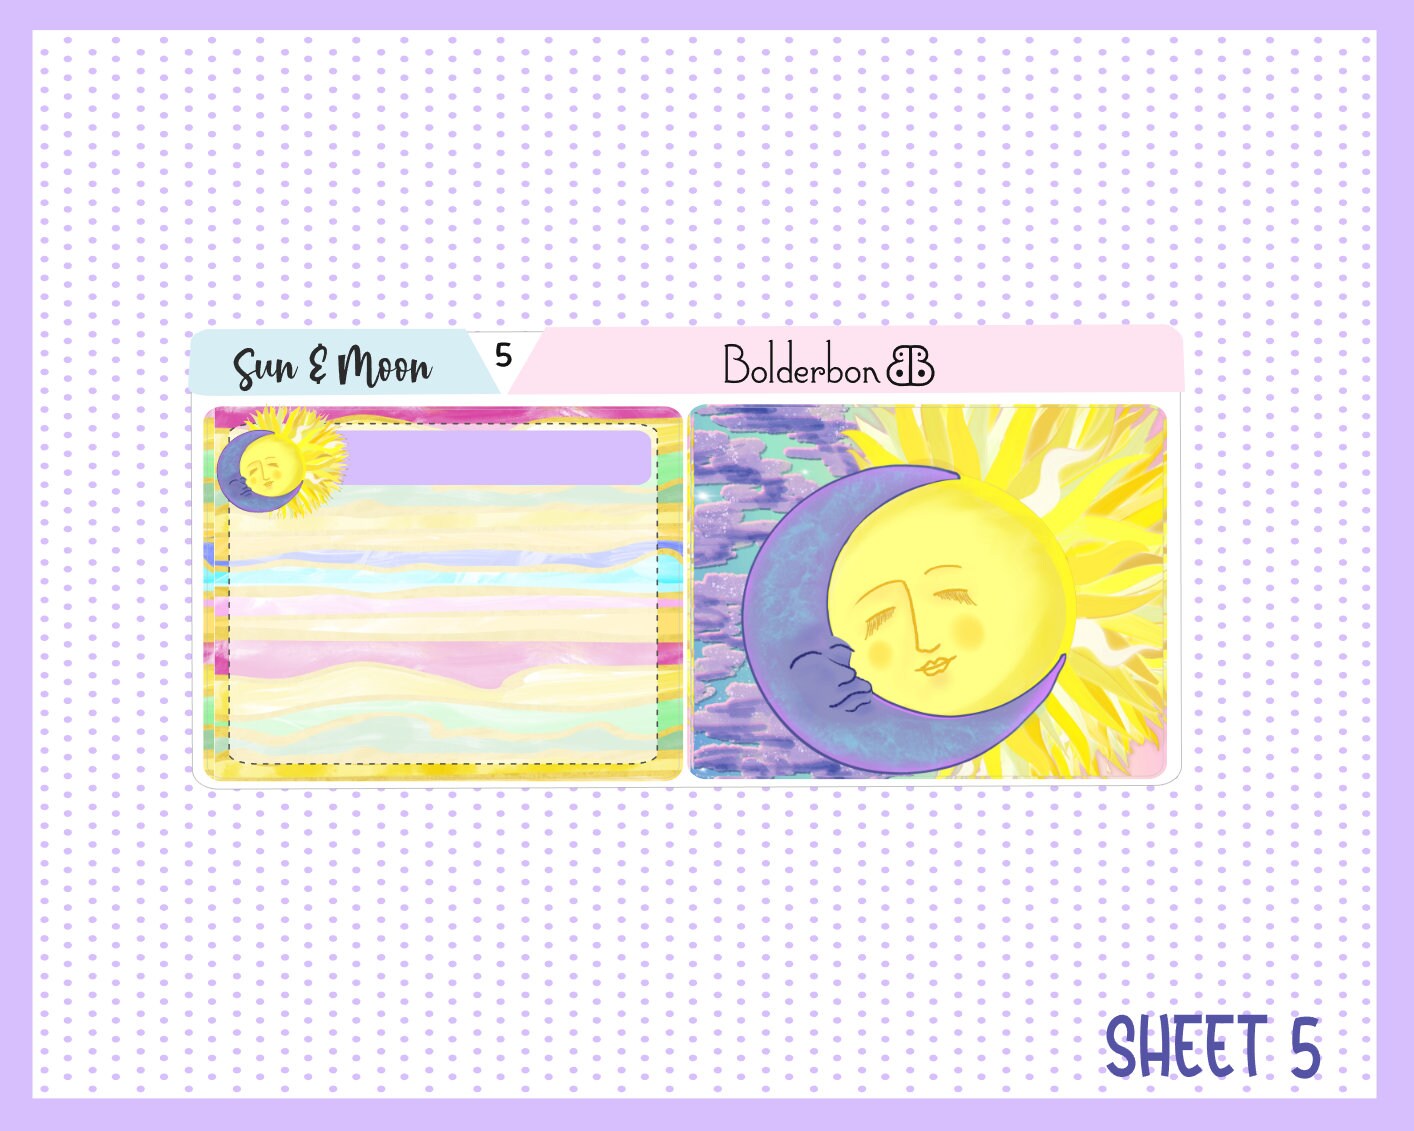 SUN & MOON "7x9 Daily Duo" || Weekly Planner Sticker Kit for Erin Condren